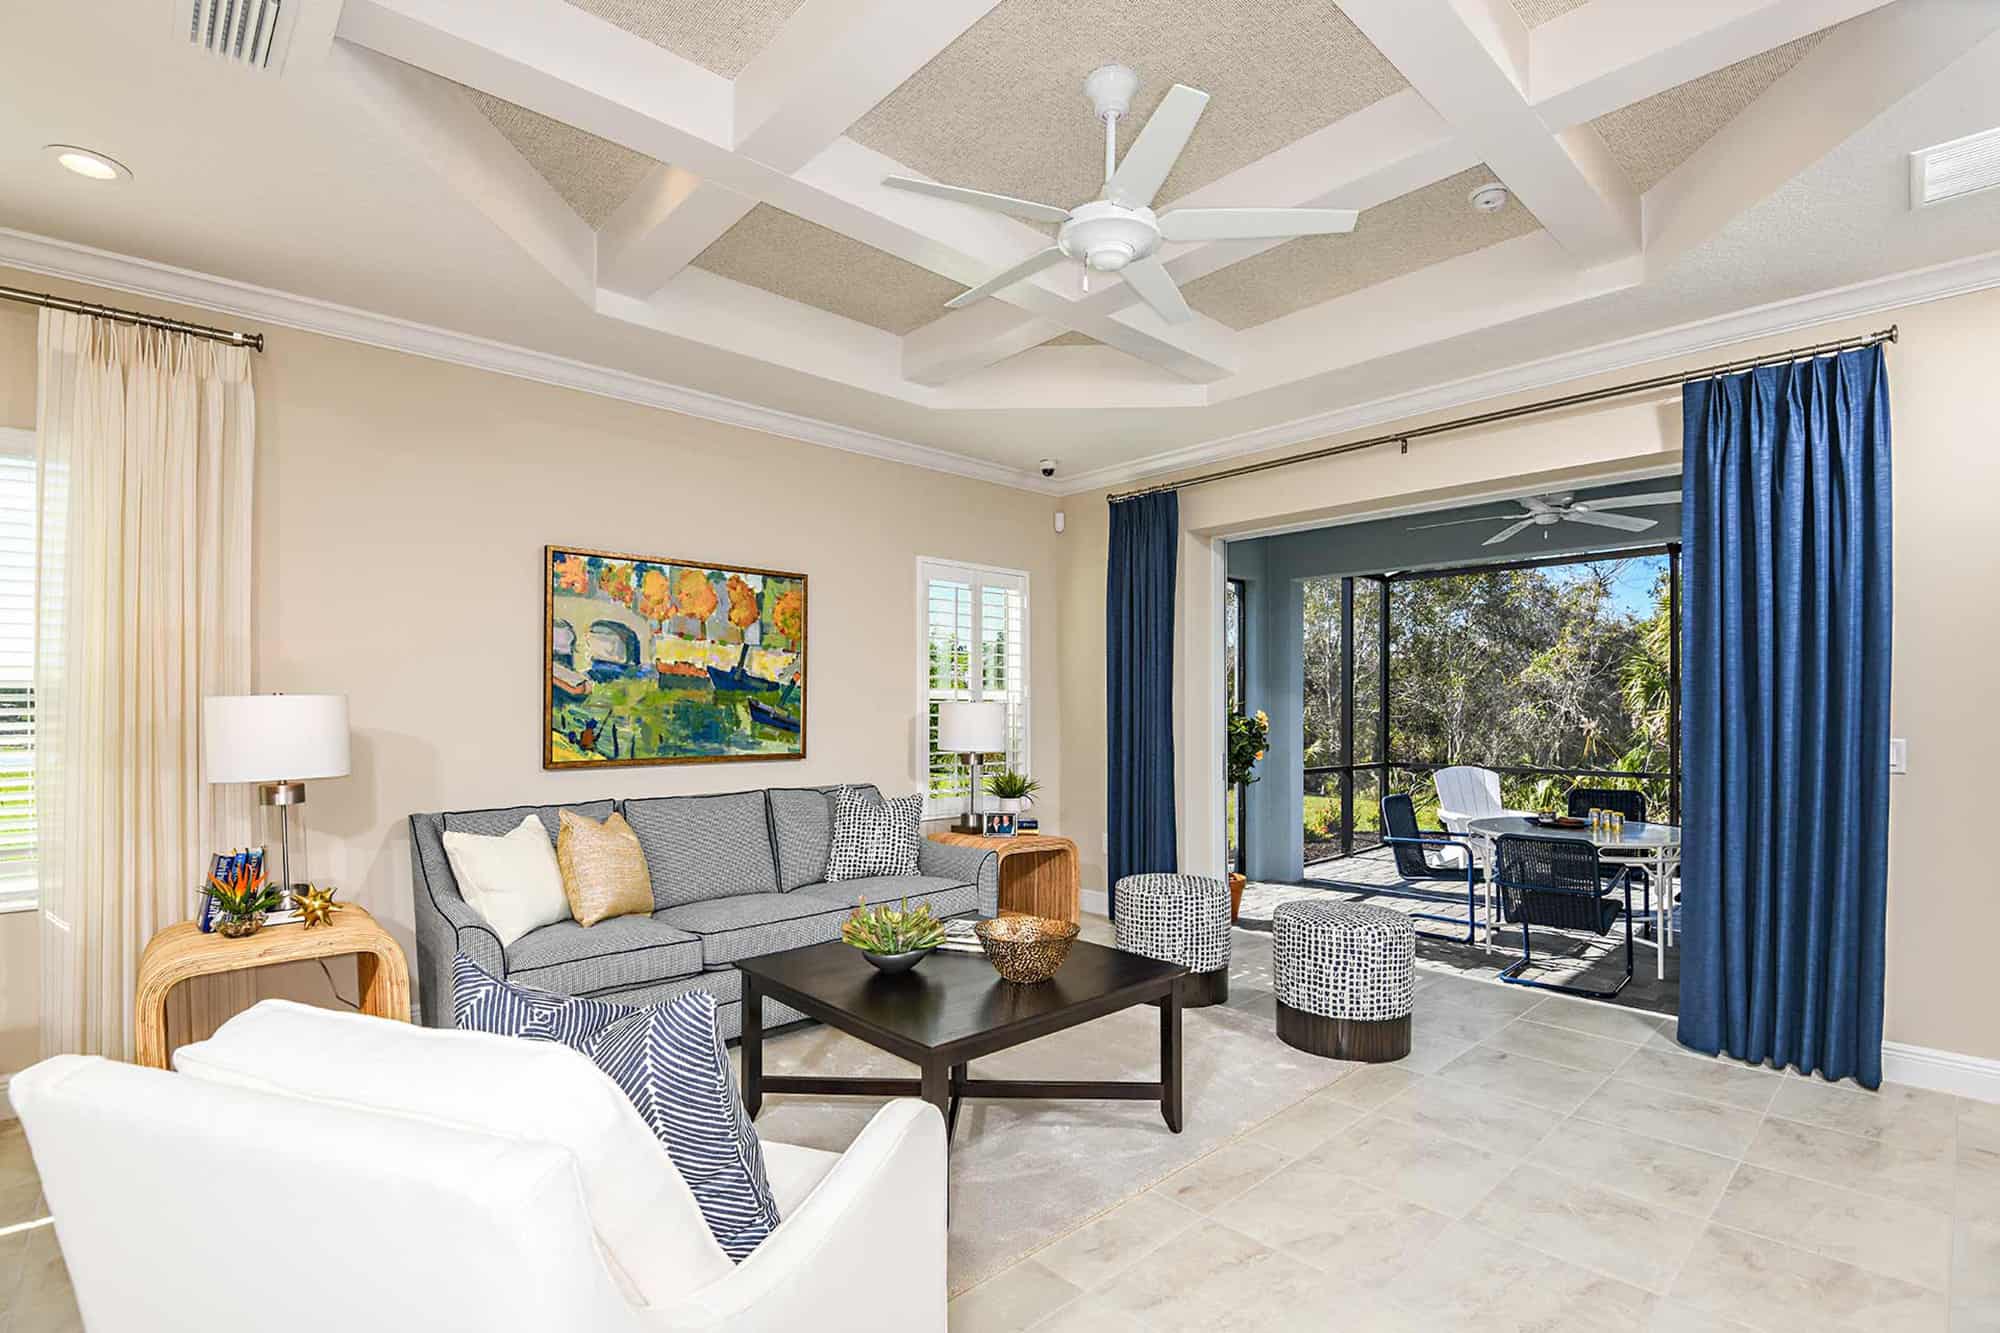 Living and sun room at Grand Park Sandcastle Neal Communities